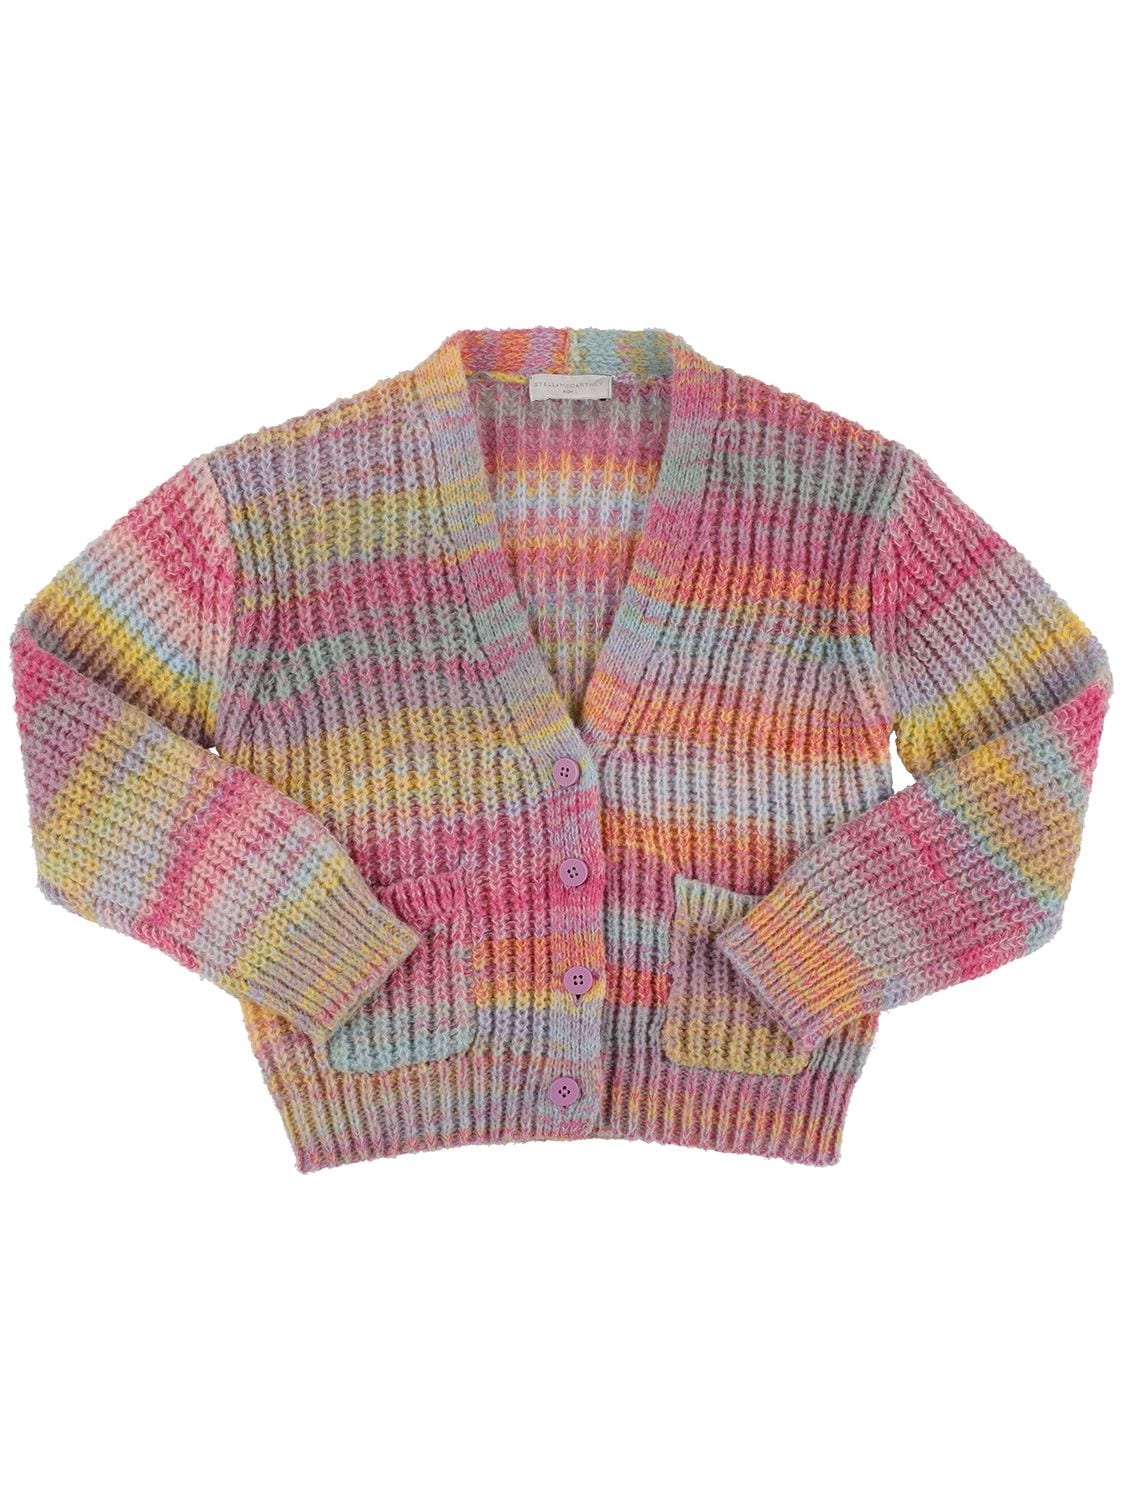 Image of Recycled Striped Knit Cardigan